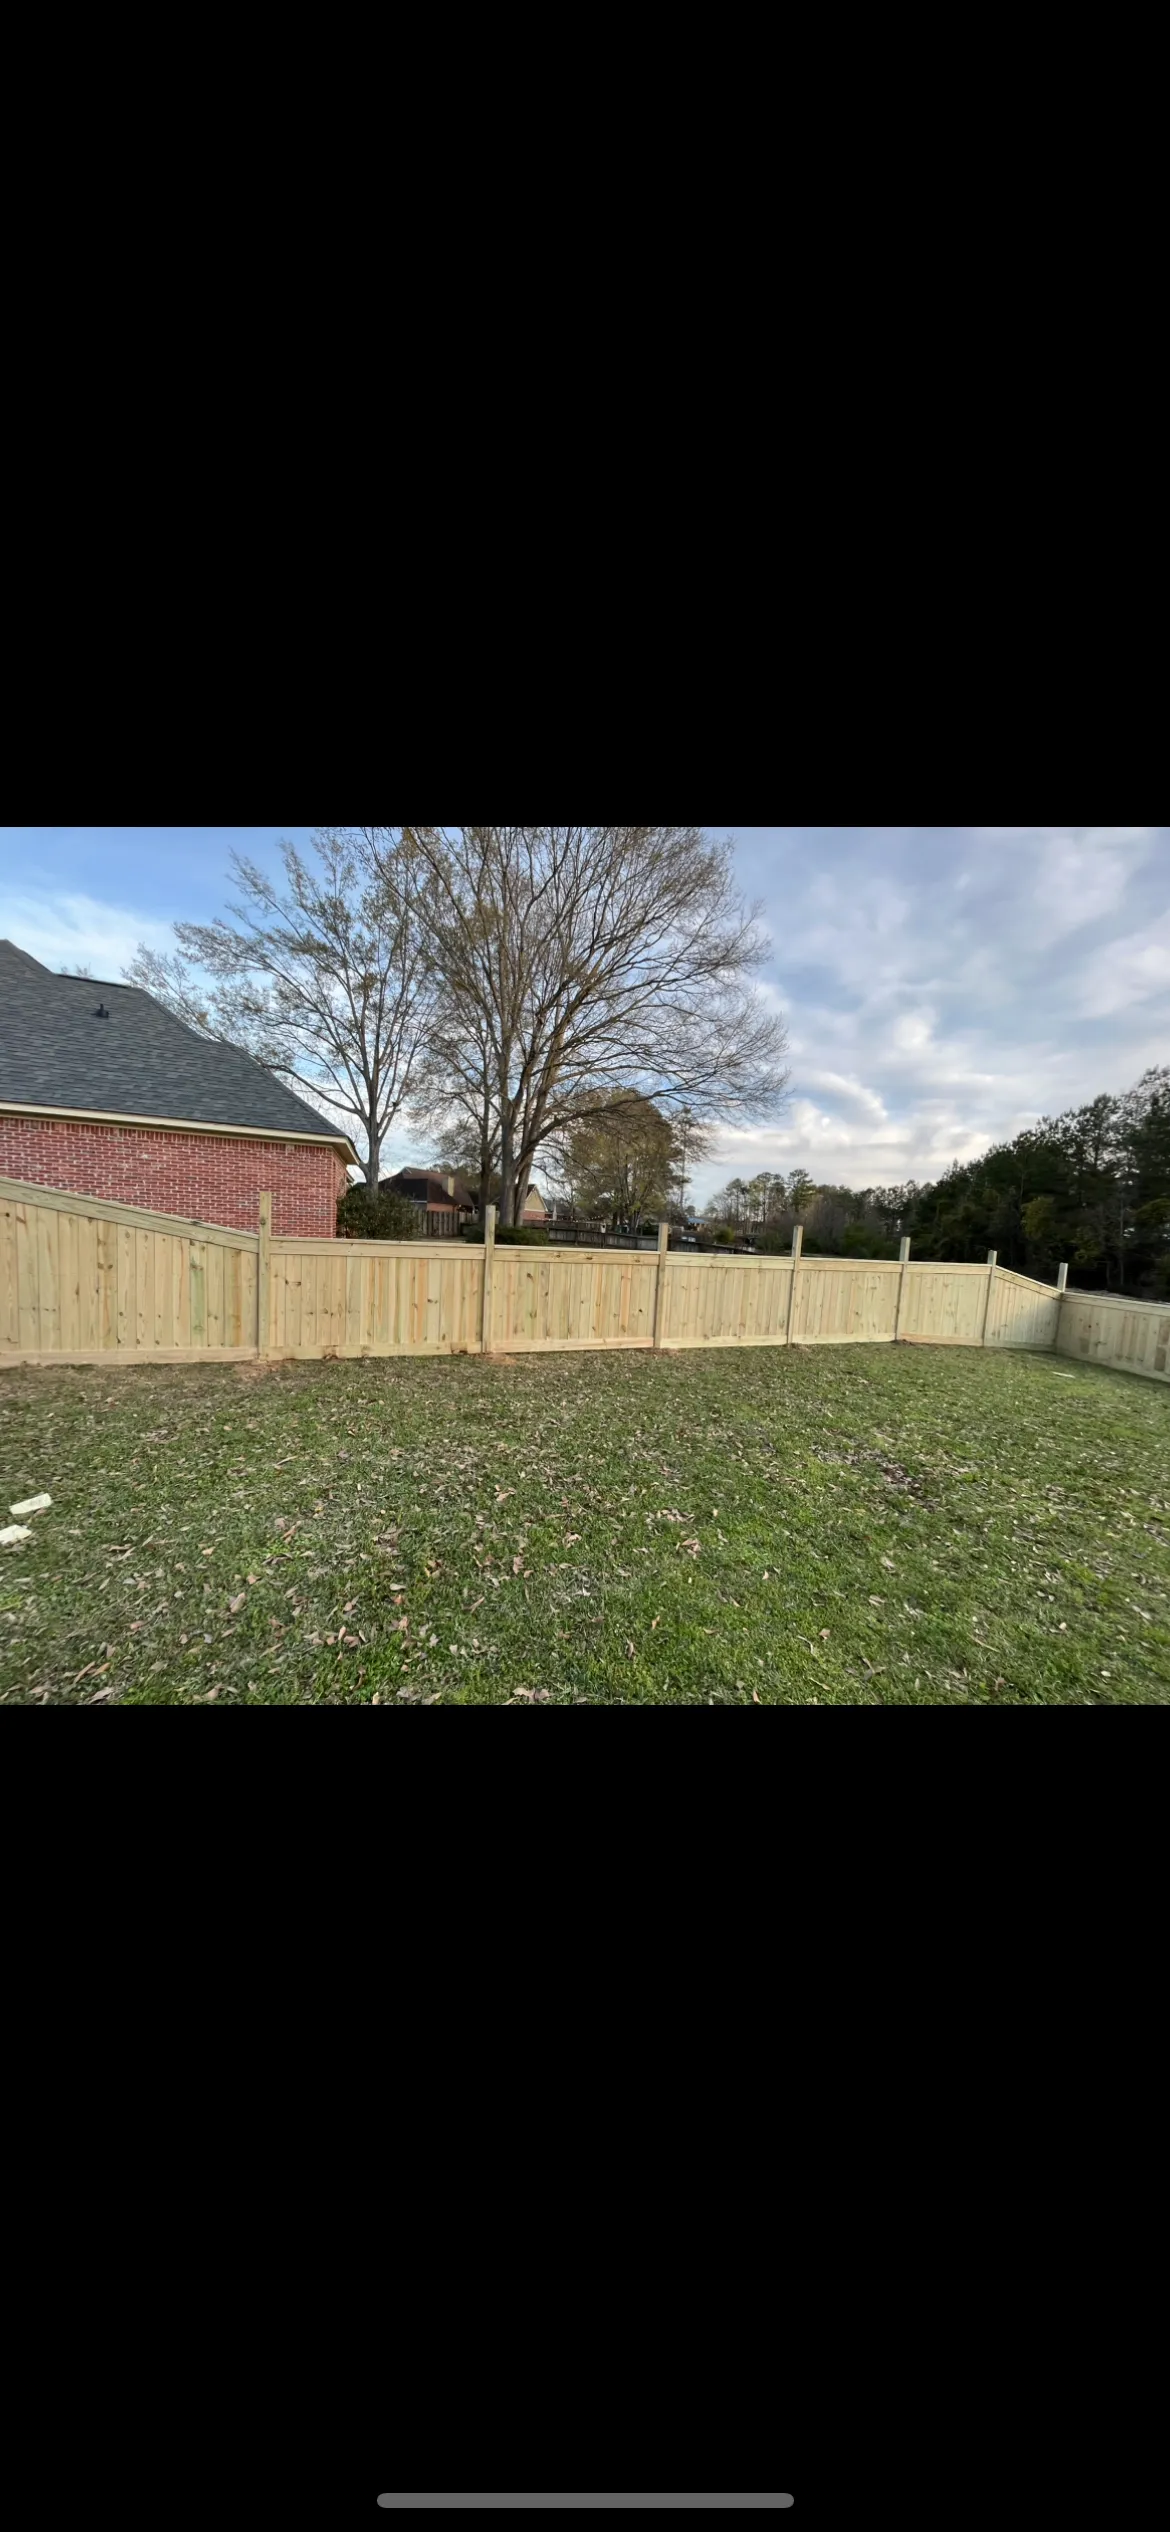 Fences for CiCi’s Fence in Pearl, Mississippi